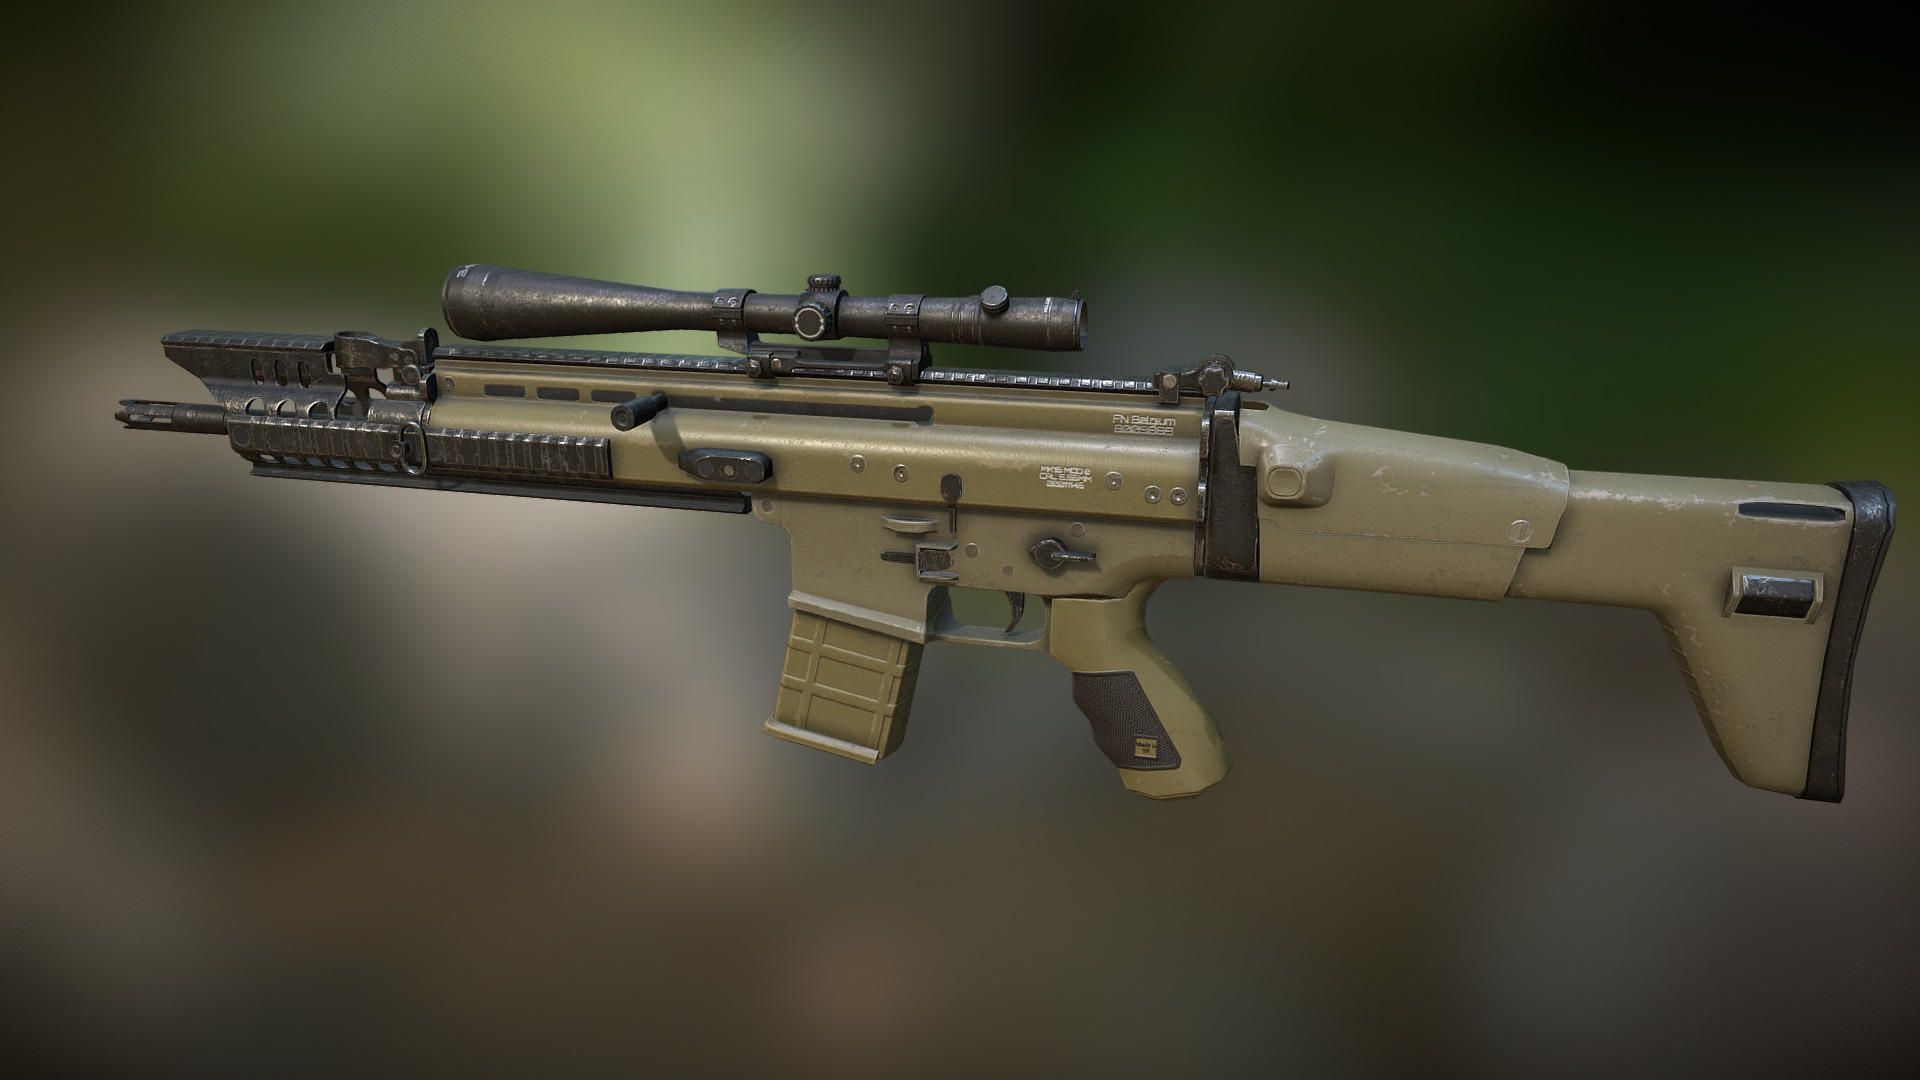 3D model FN SCAR + rifle scope - This is a 3D model of the FN SCAR + rifle scope. The 3D model is about a rifle on a table.